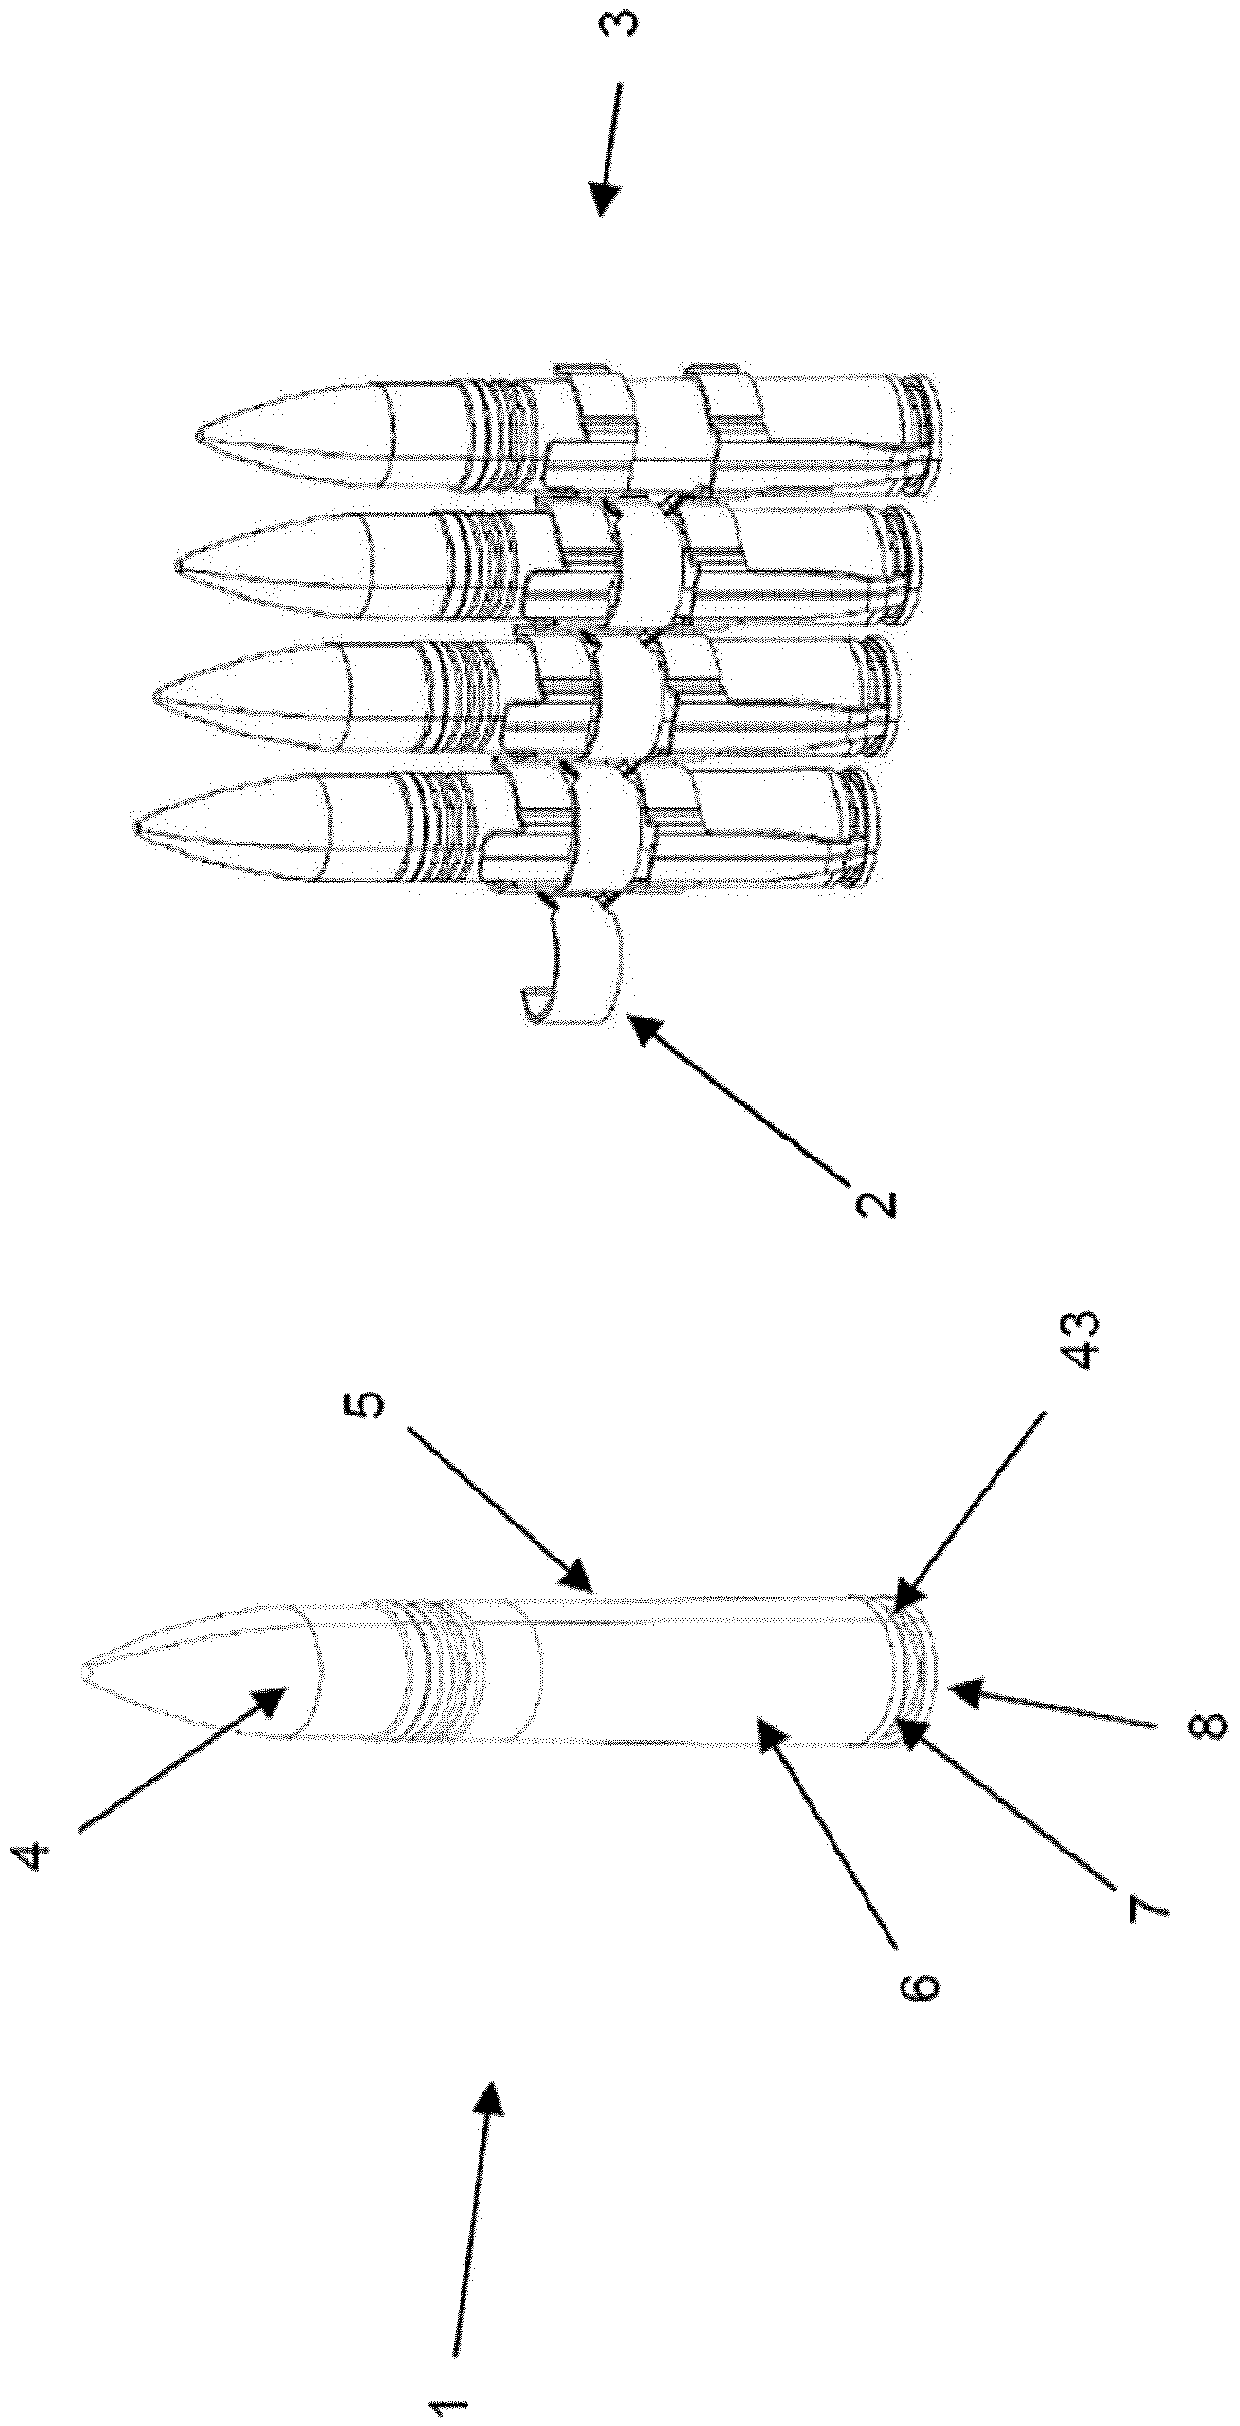 Device for ejecting cartridges and/or links from a chain or ammunition strip connected to a main and/or secondary weapon